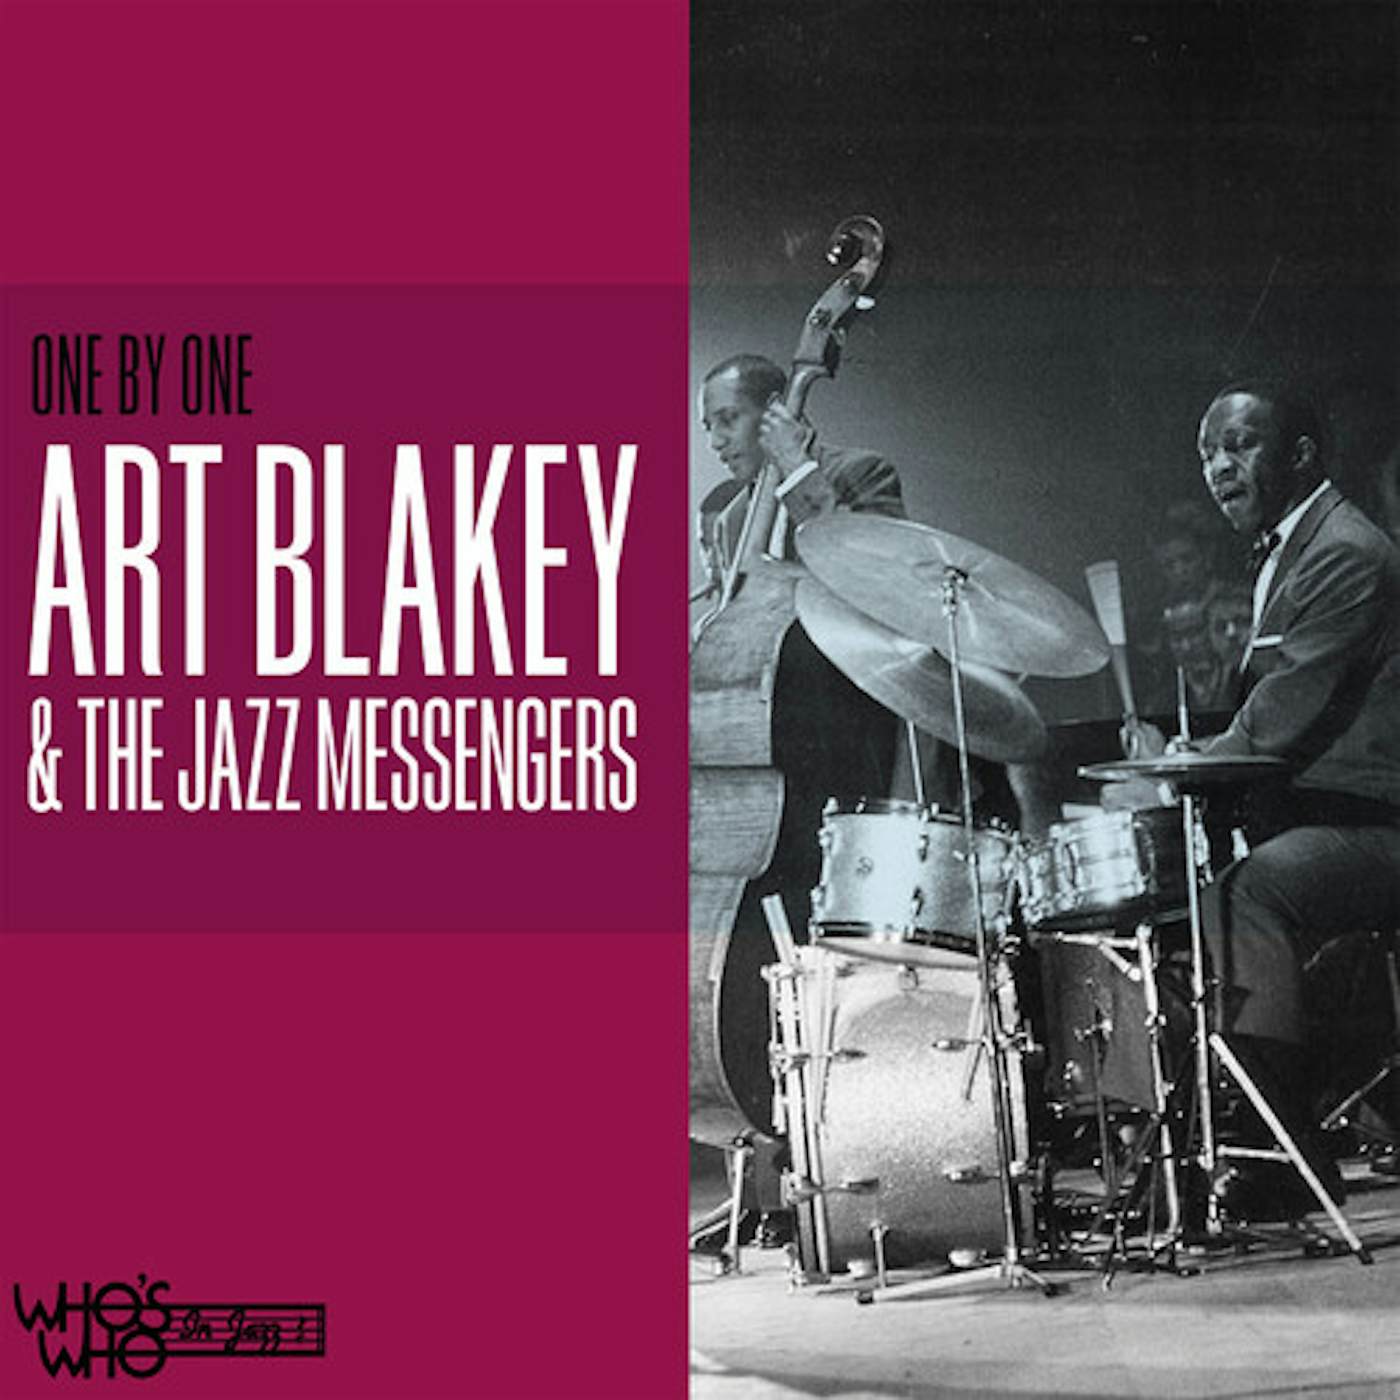 Art Blakey & The Jazz Messengers ONE BY ONE CD